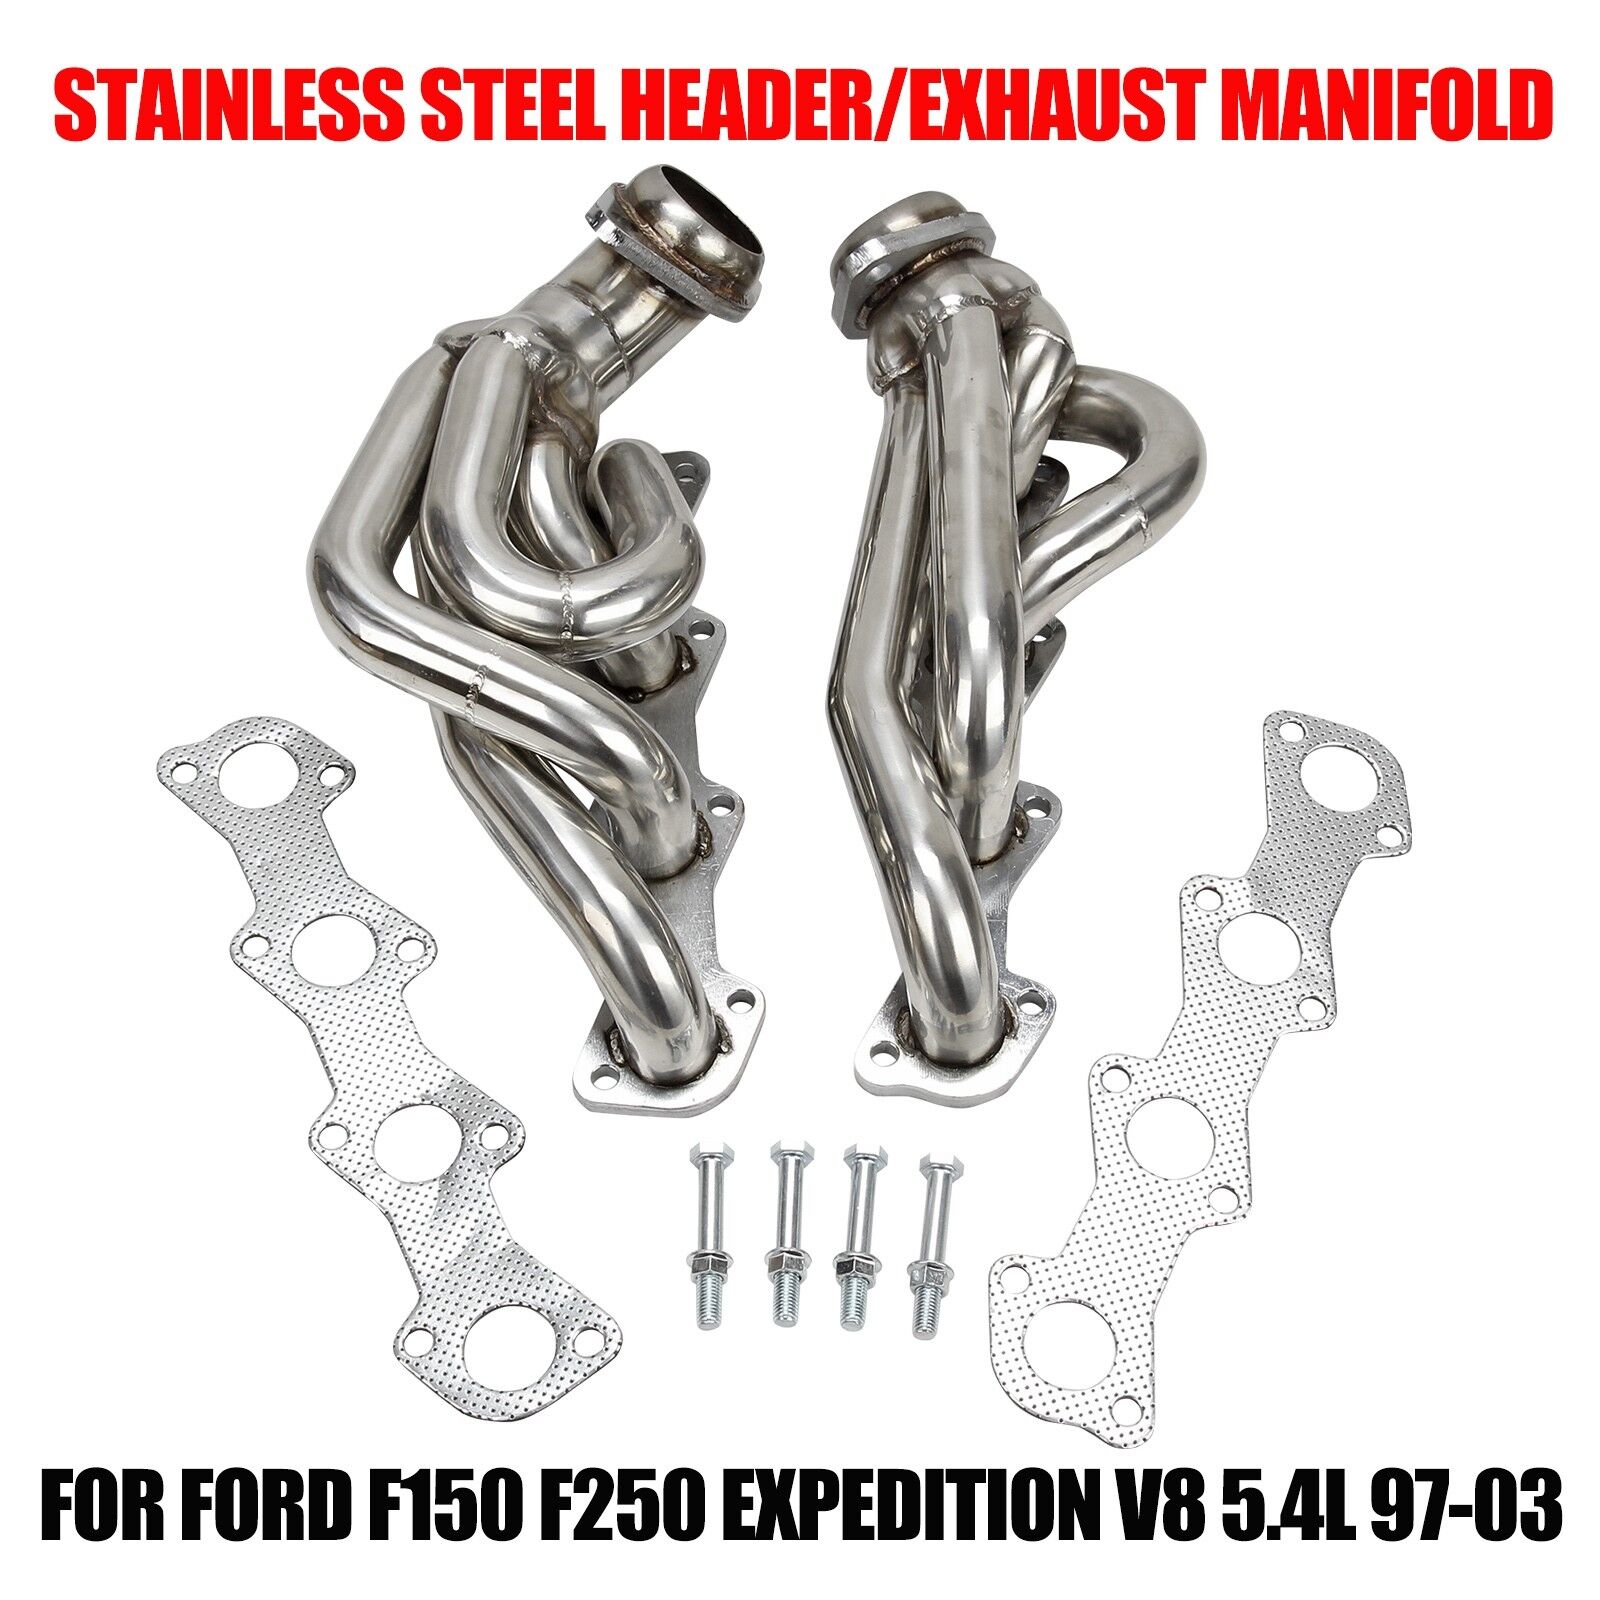 FOR FORD  F150 F250 EXPEDITION V8 5.4 STAINLESS HEADER/EXHAUST MANIFOLD